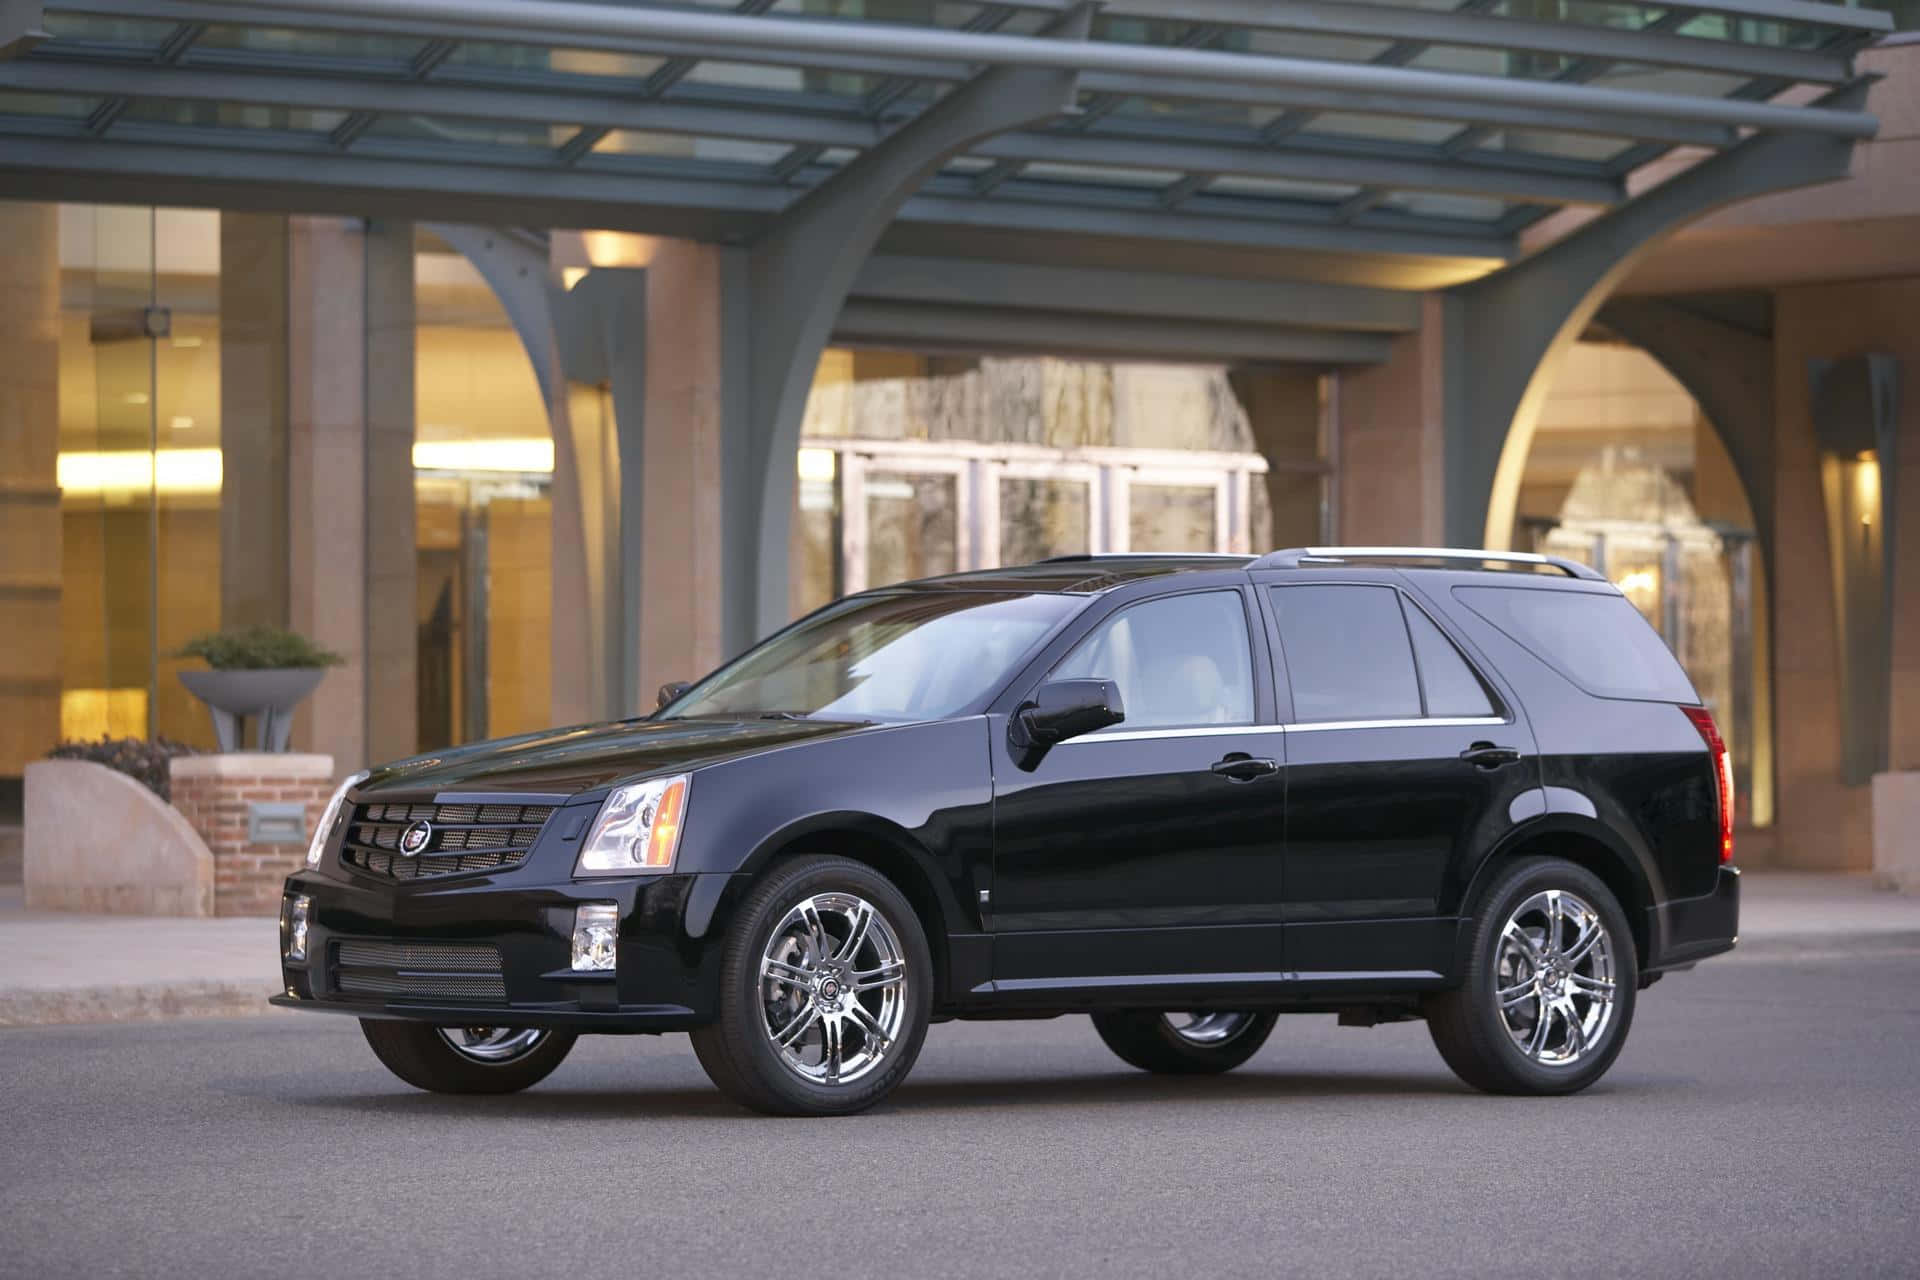 Luxurious Cadillac SRX on the Road Wallpaper